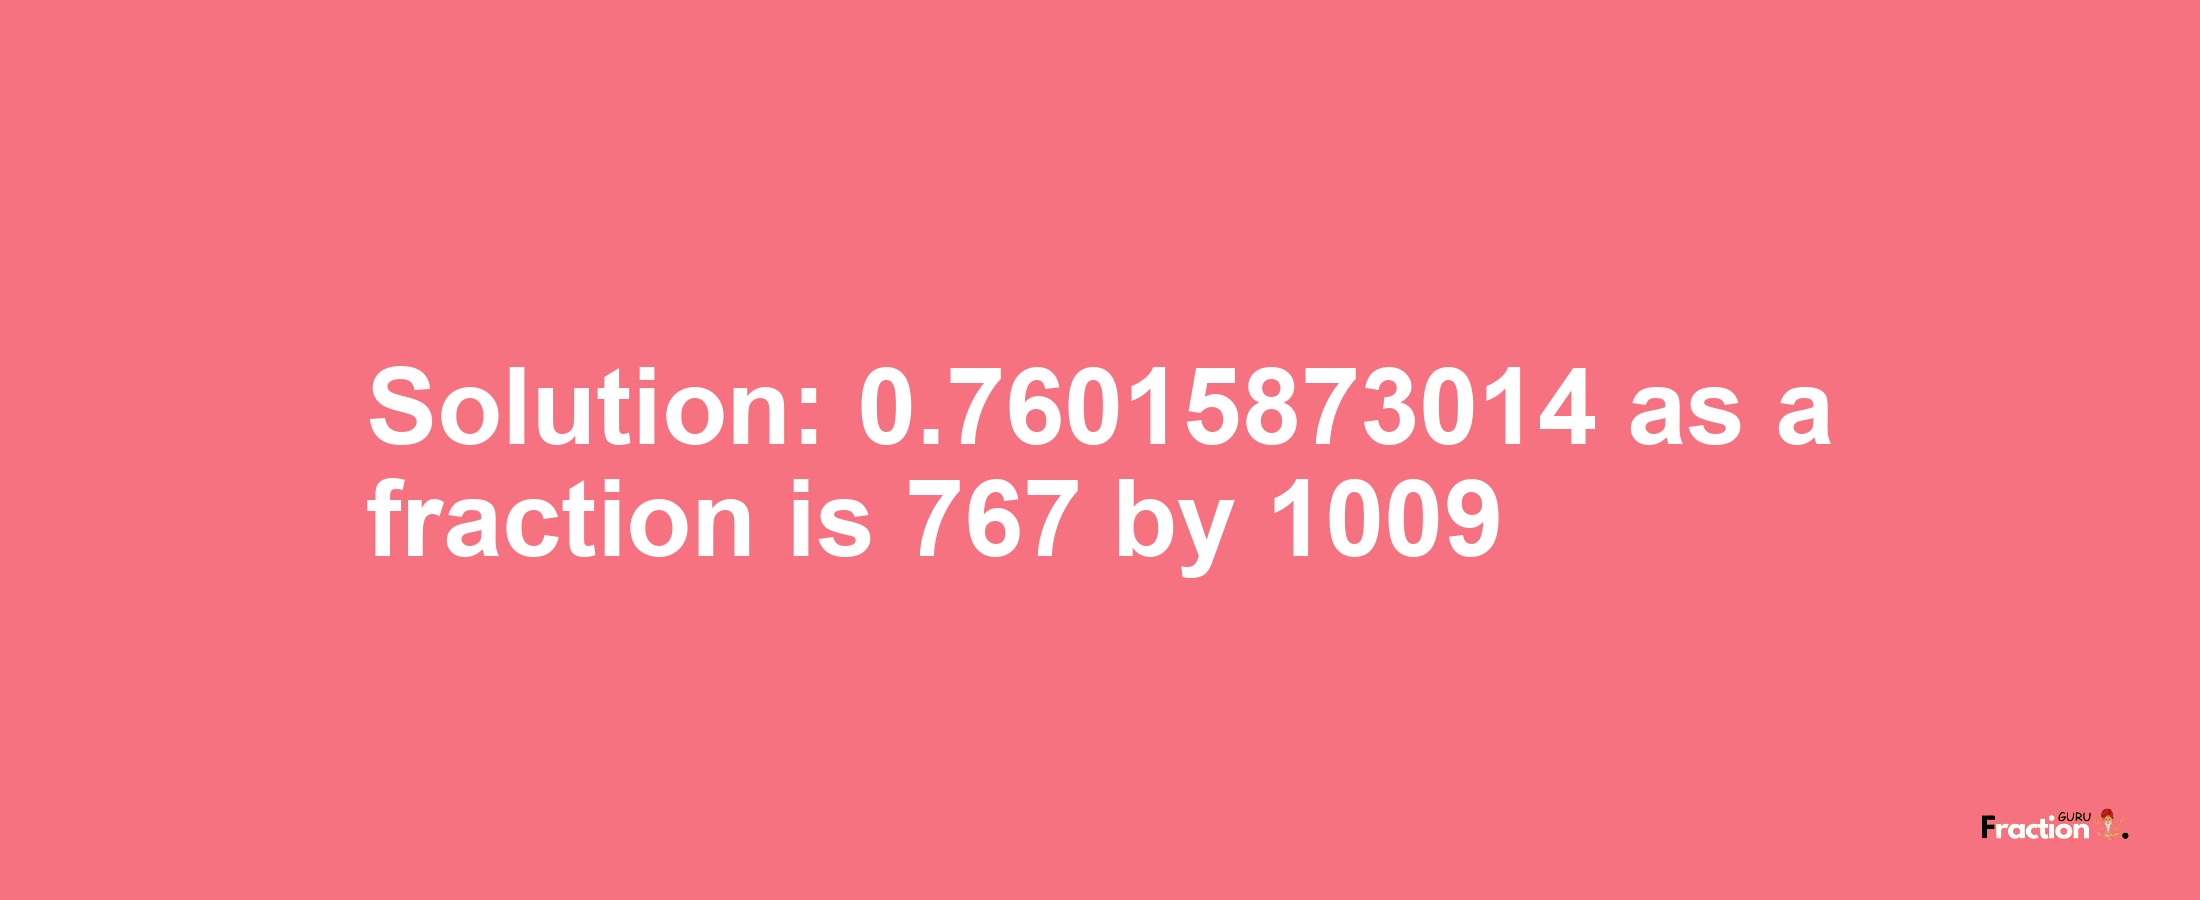 Solution:0.76015873014 as a fraction is 767/1009